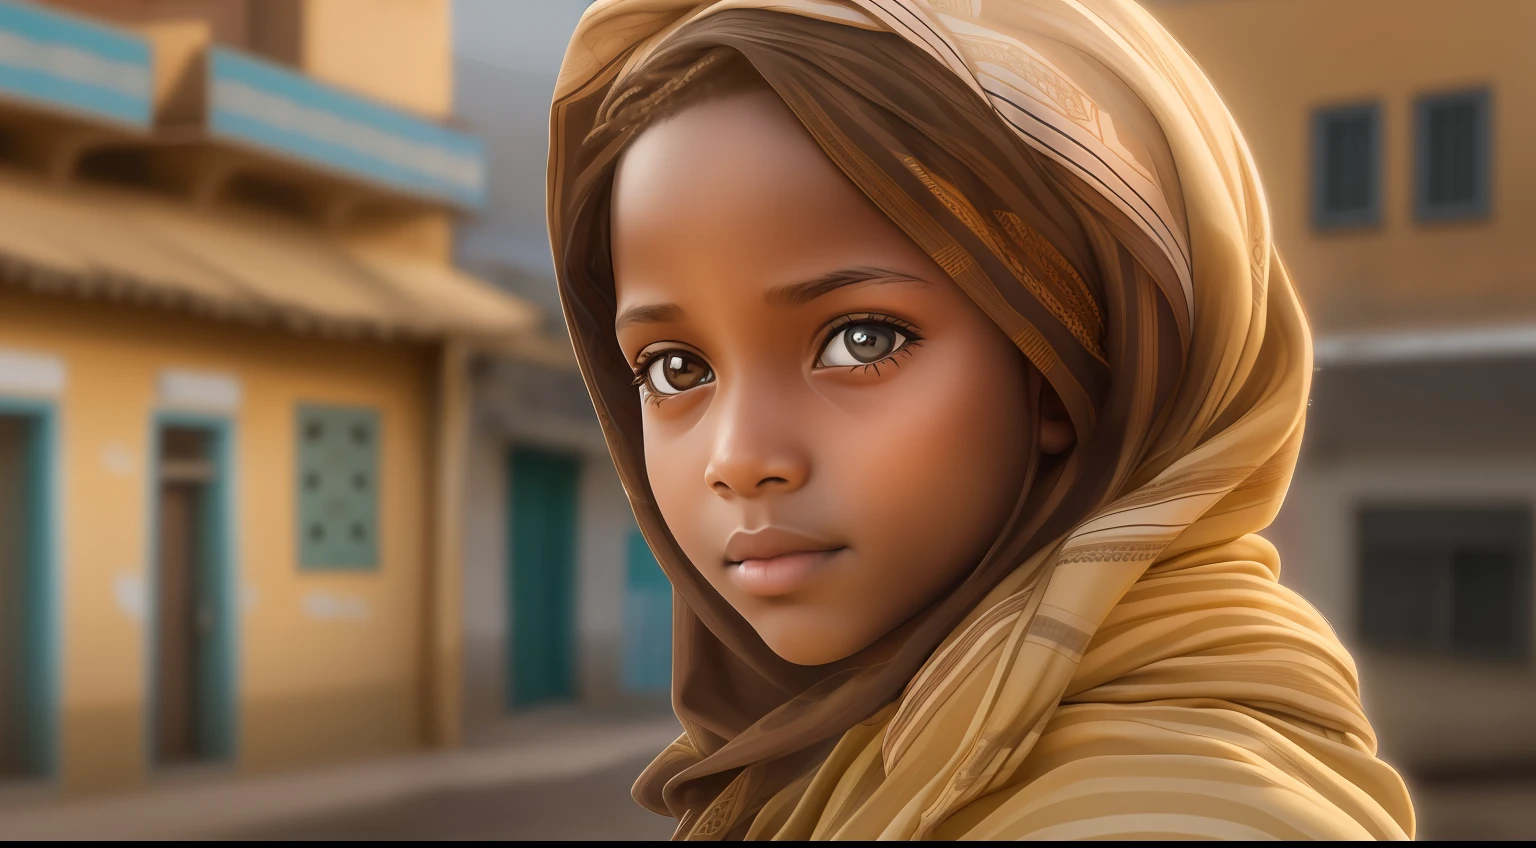 "Generate a hyper-realistic image of a 10-year-old girl from Mauritania with authentic Mauritanian features hair, skin colour, eyes, real, set against a realistic city background, showcasing the best quality and intricate details."